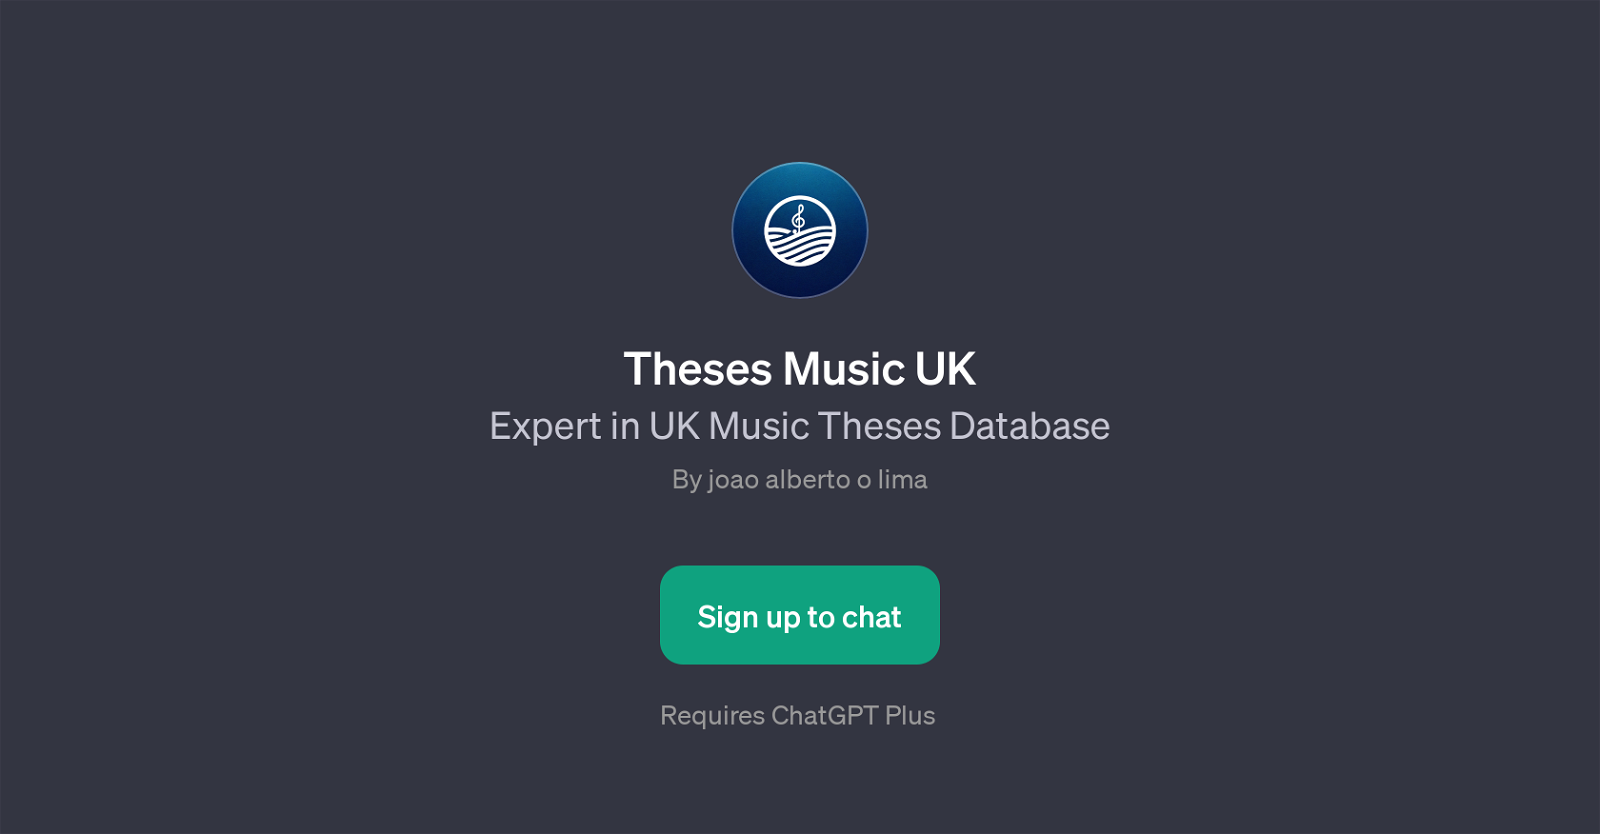 Theses Music UK website